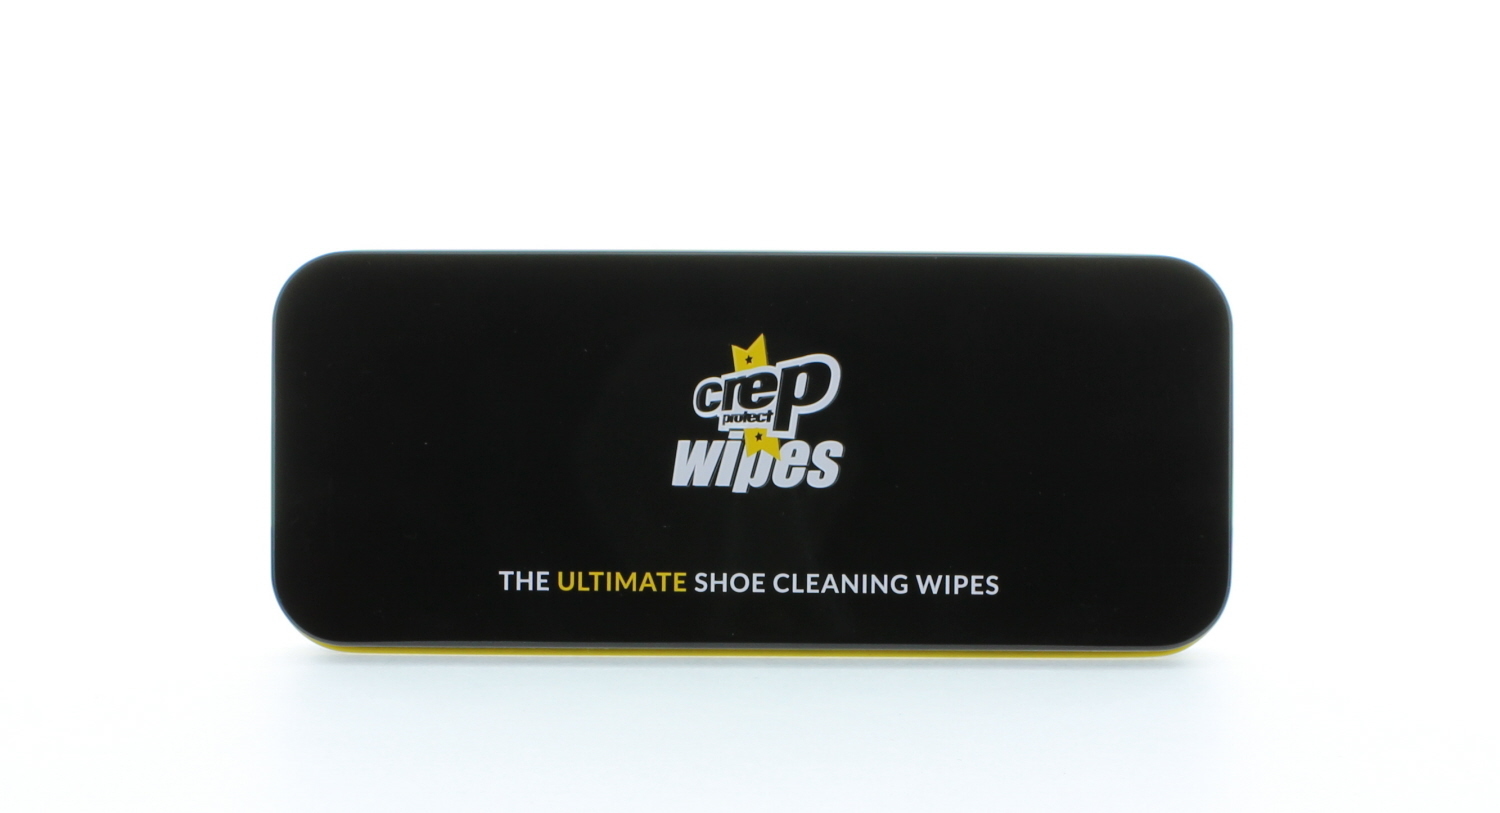 Crep protect - Wipes